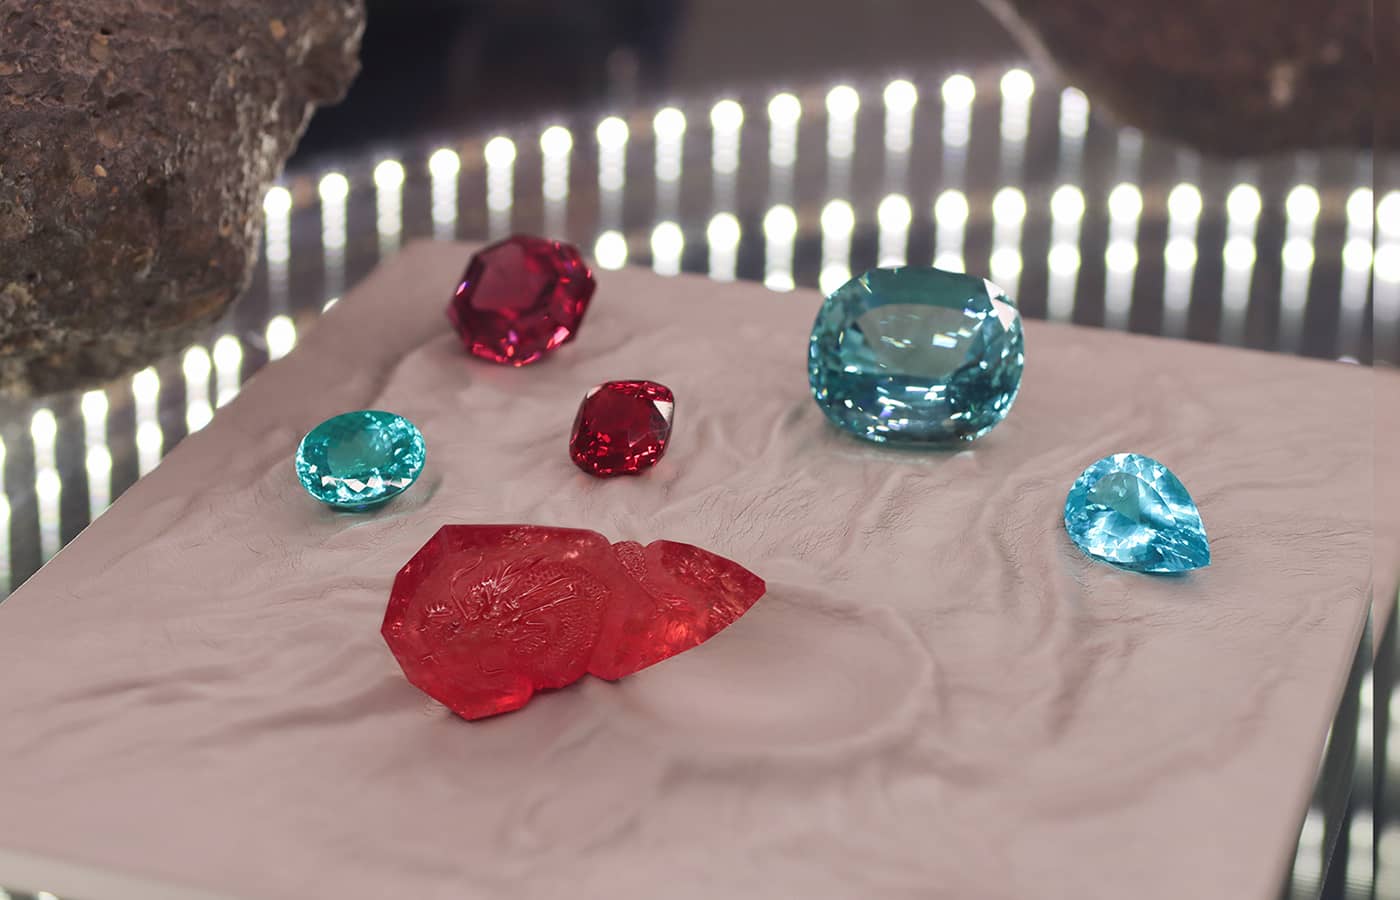 Gemstones in Jochen Leën's private collection including red spinel, Paraiba tourmalines and a red beryl (front) with a dragon carving